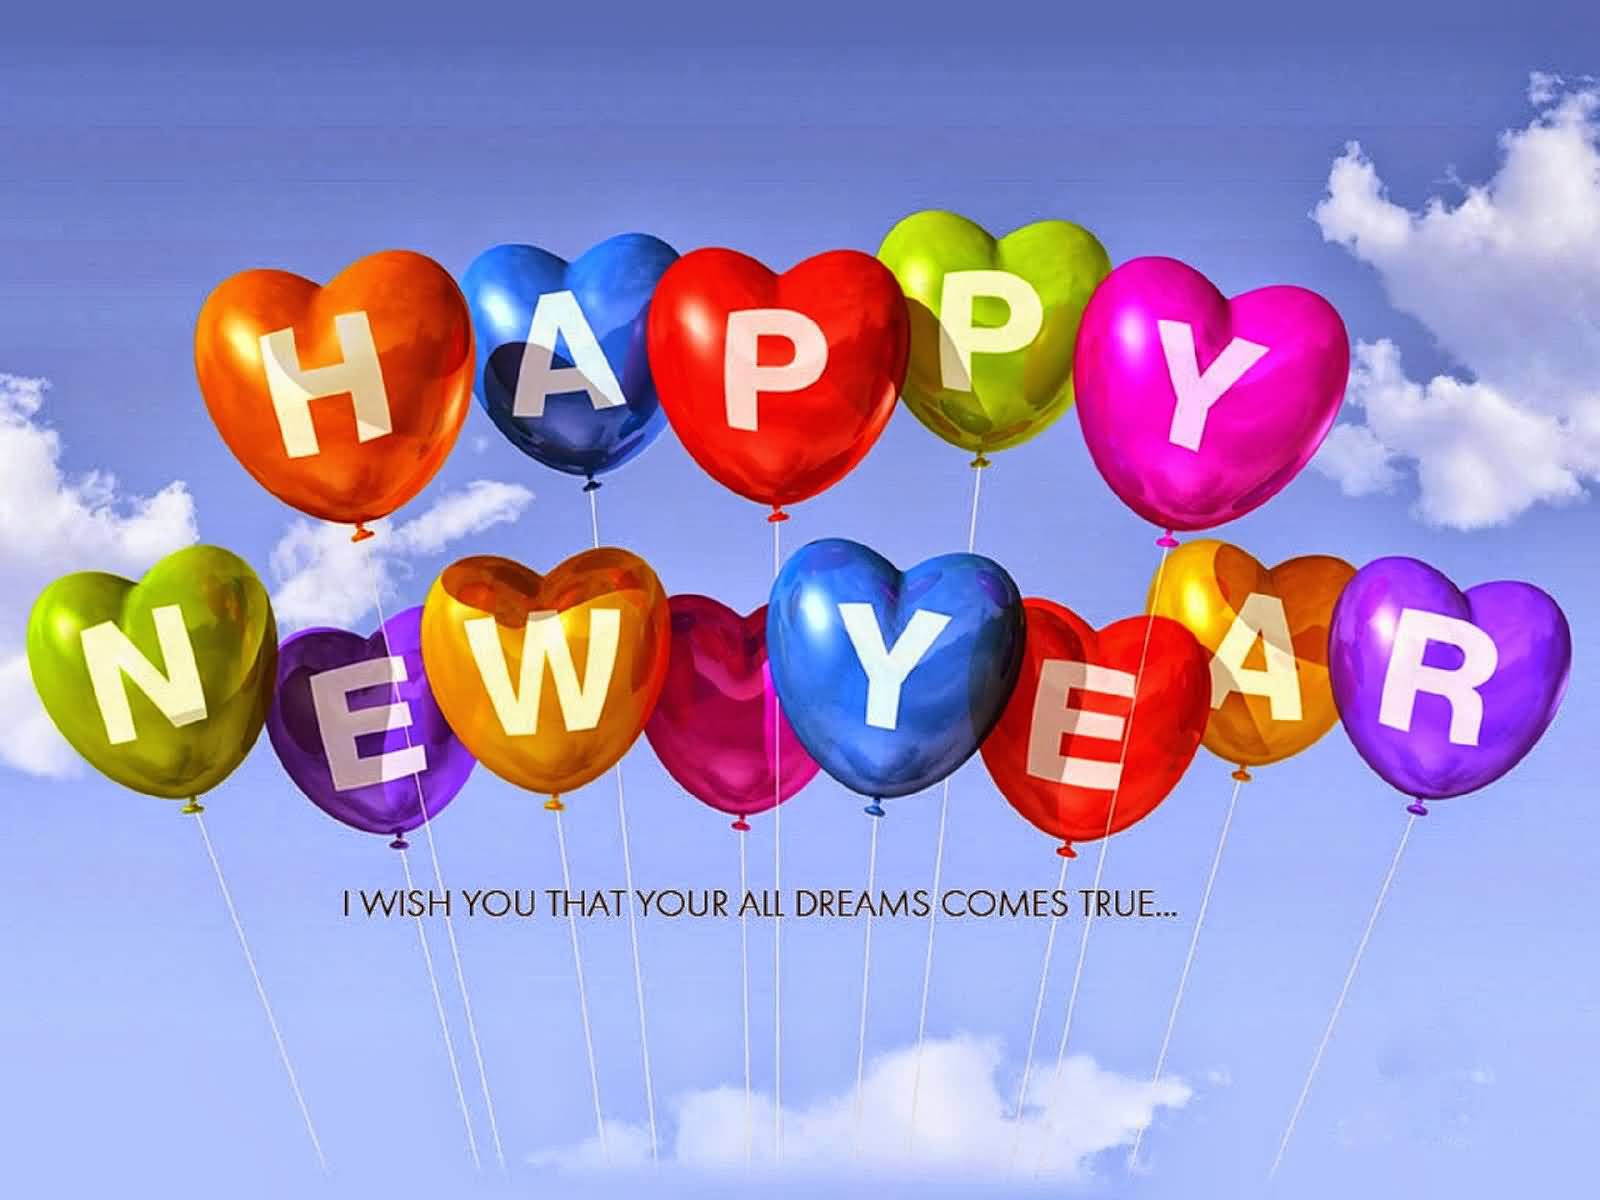 Happy New Year I Wish You That Your All Dreams Comes True Heart Balloons